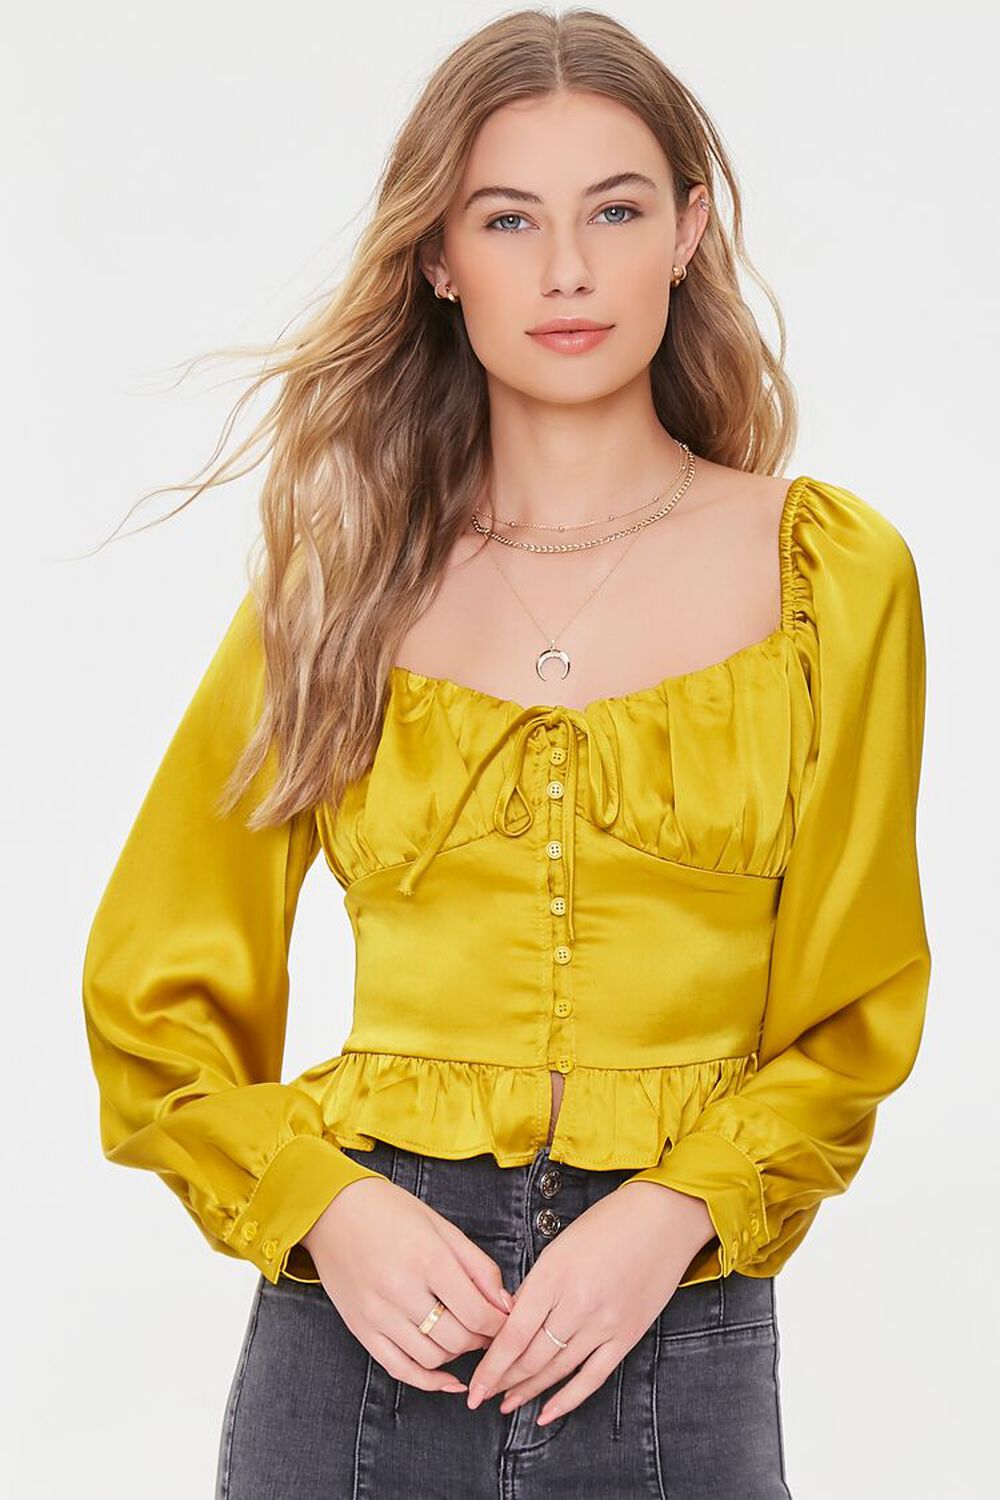 GOLD Satin Button-Front Flounce Top, image 1